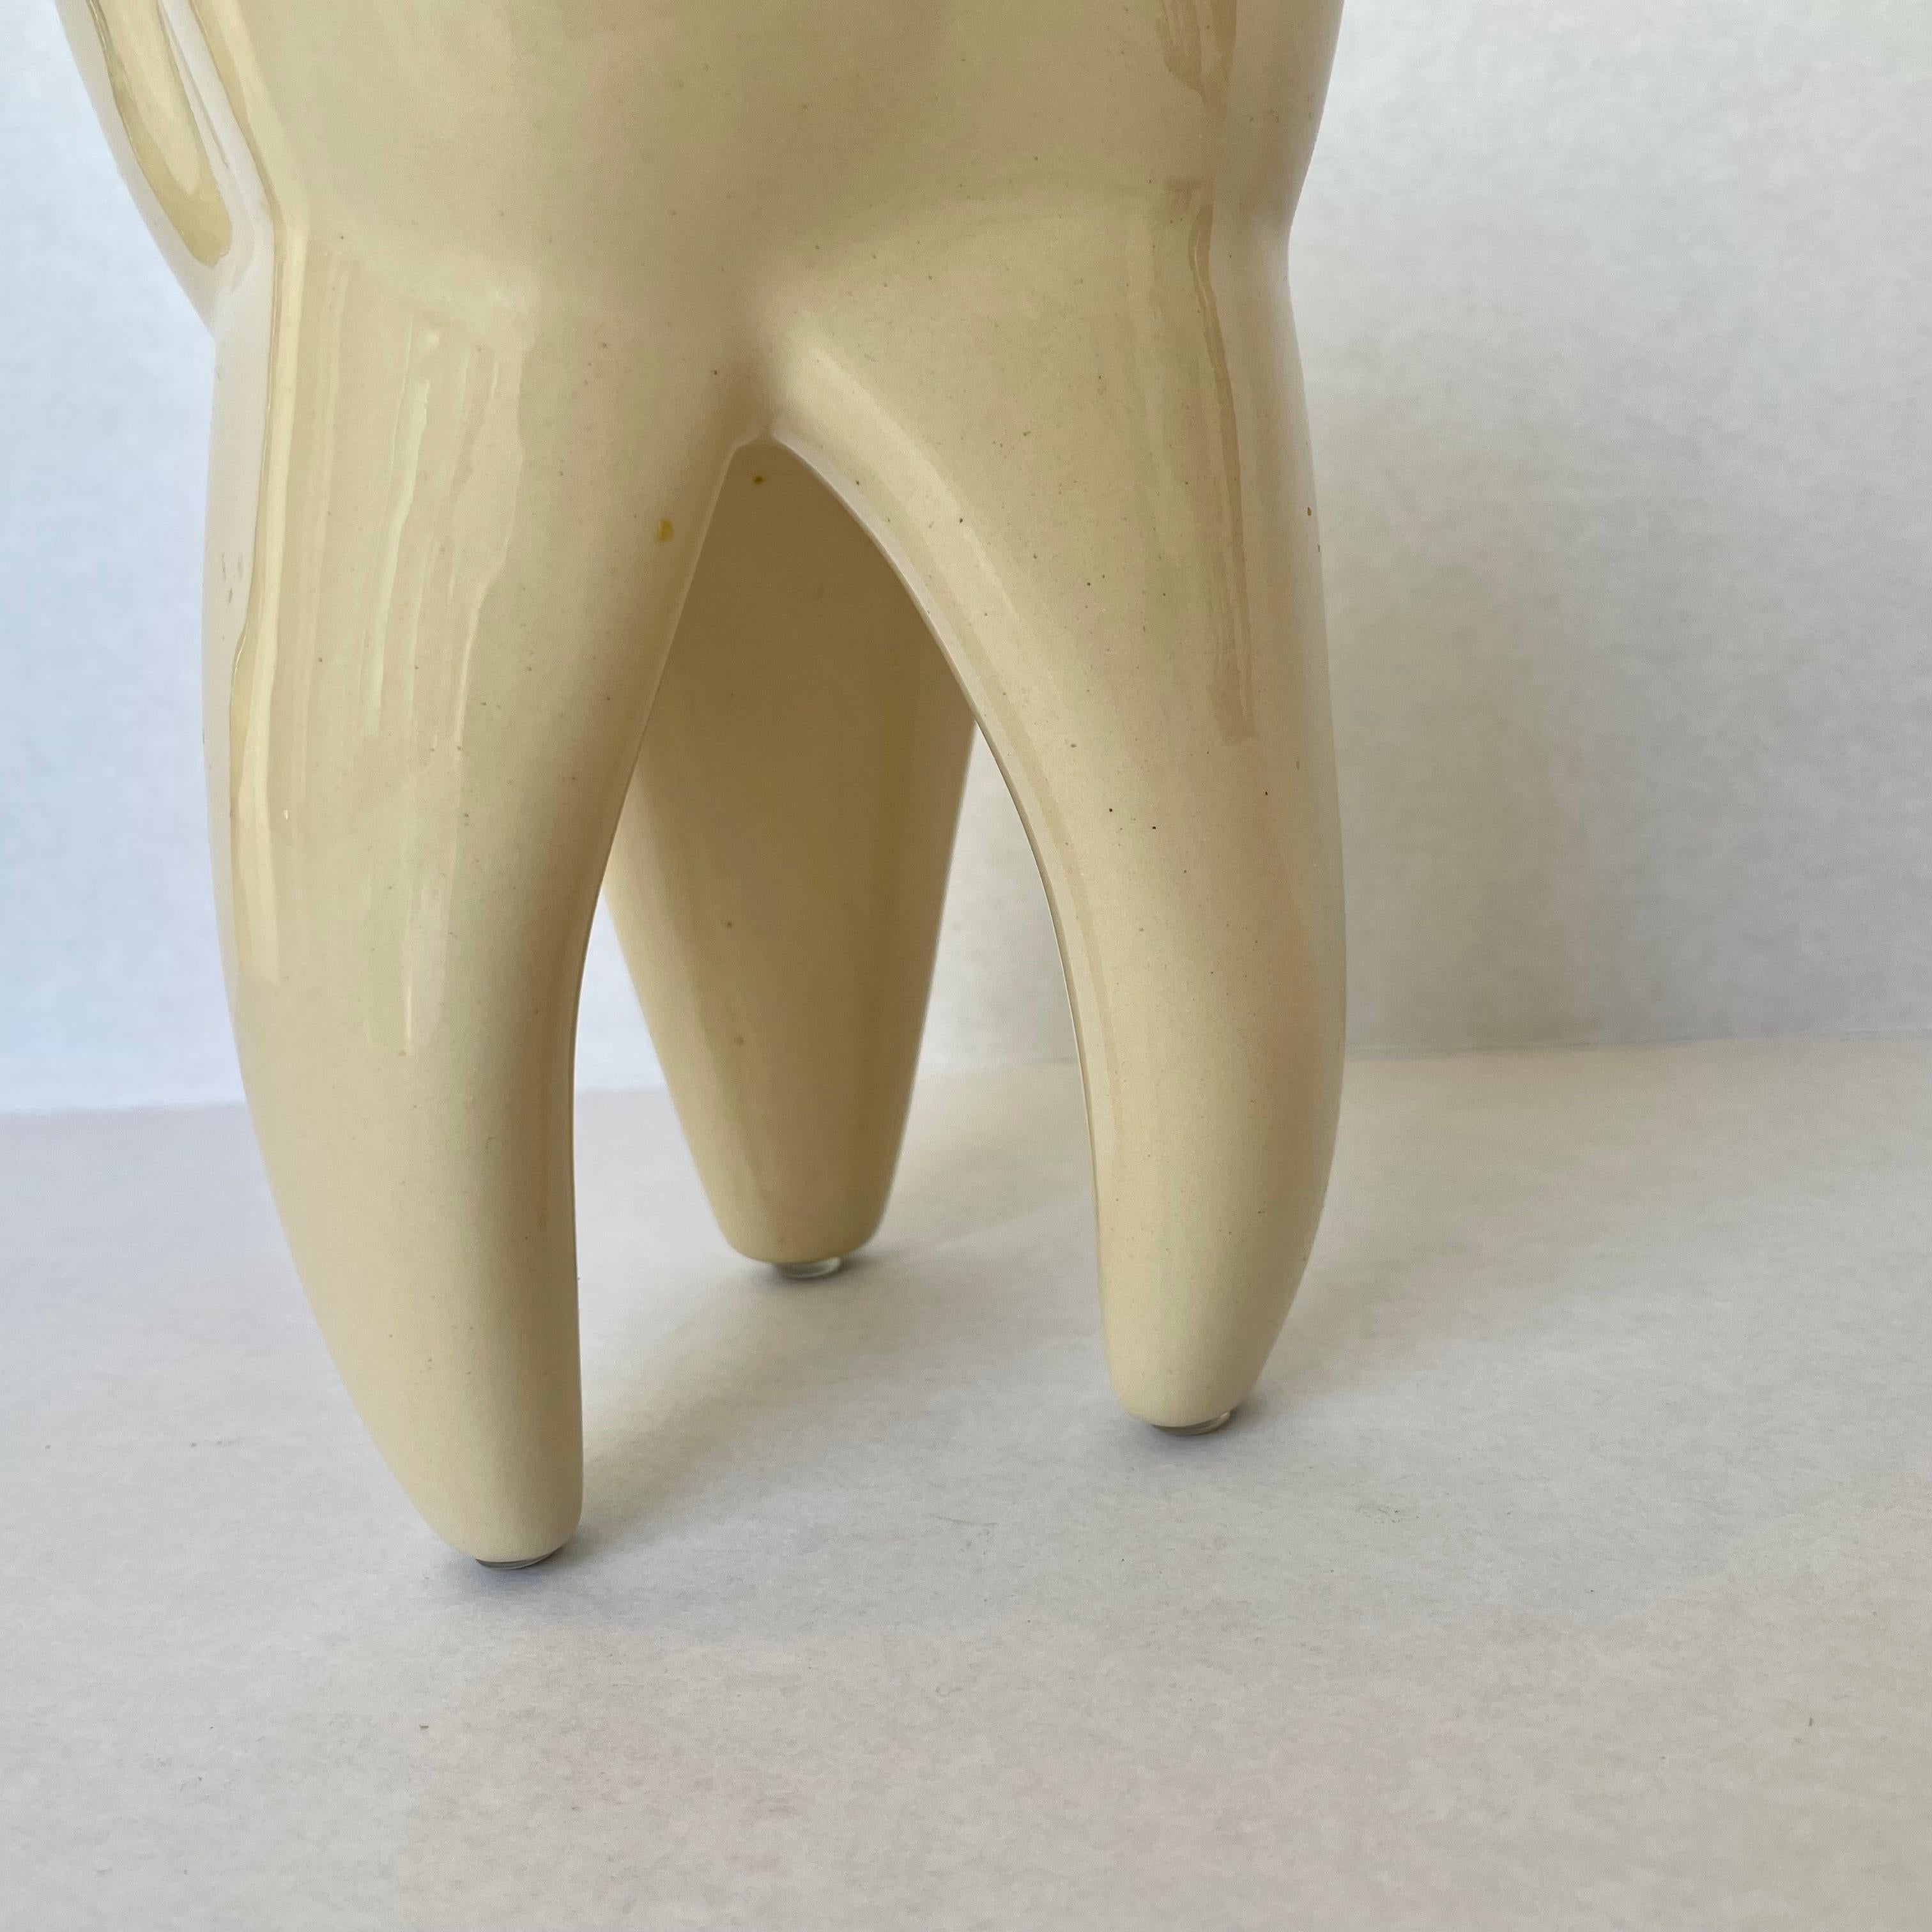 Giant Ceramic Tooth Catchall 1